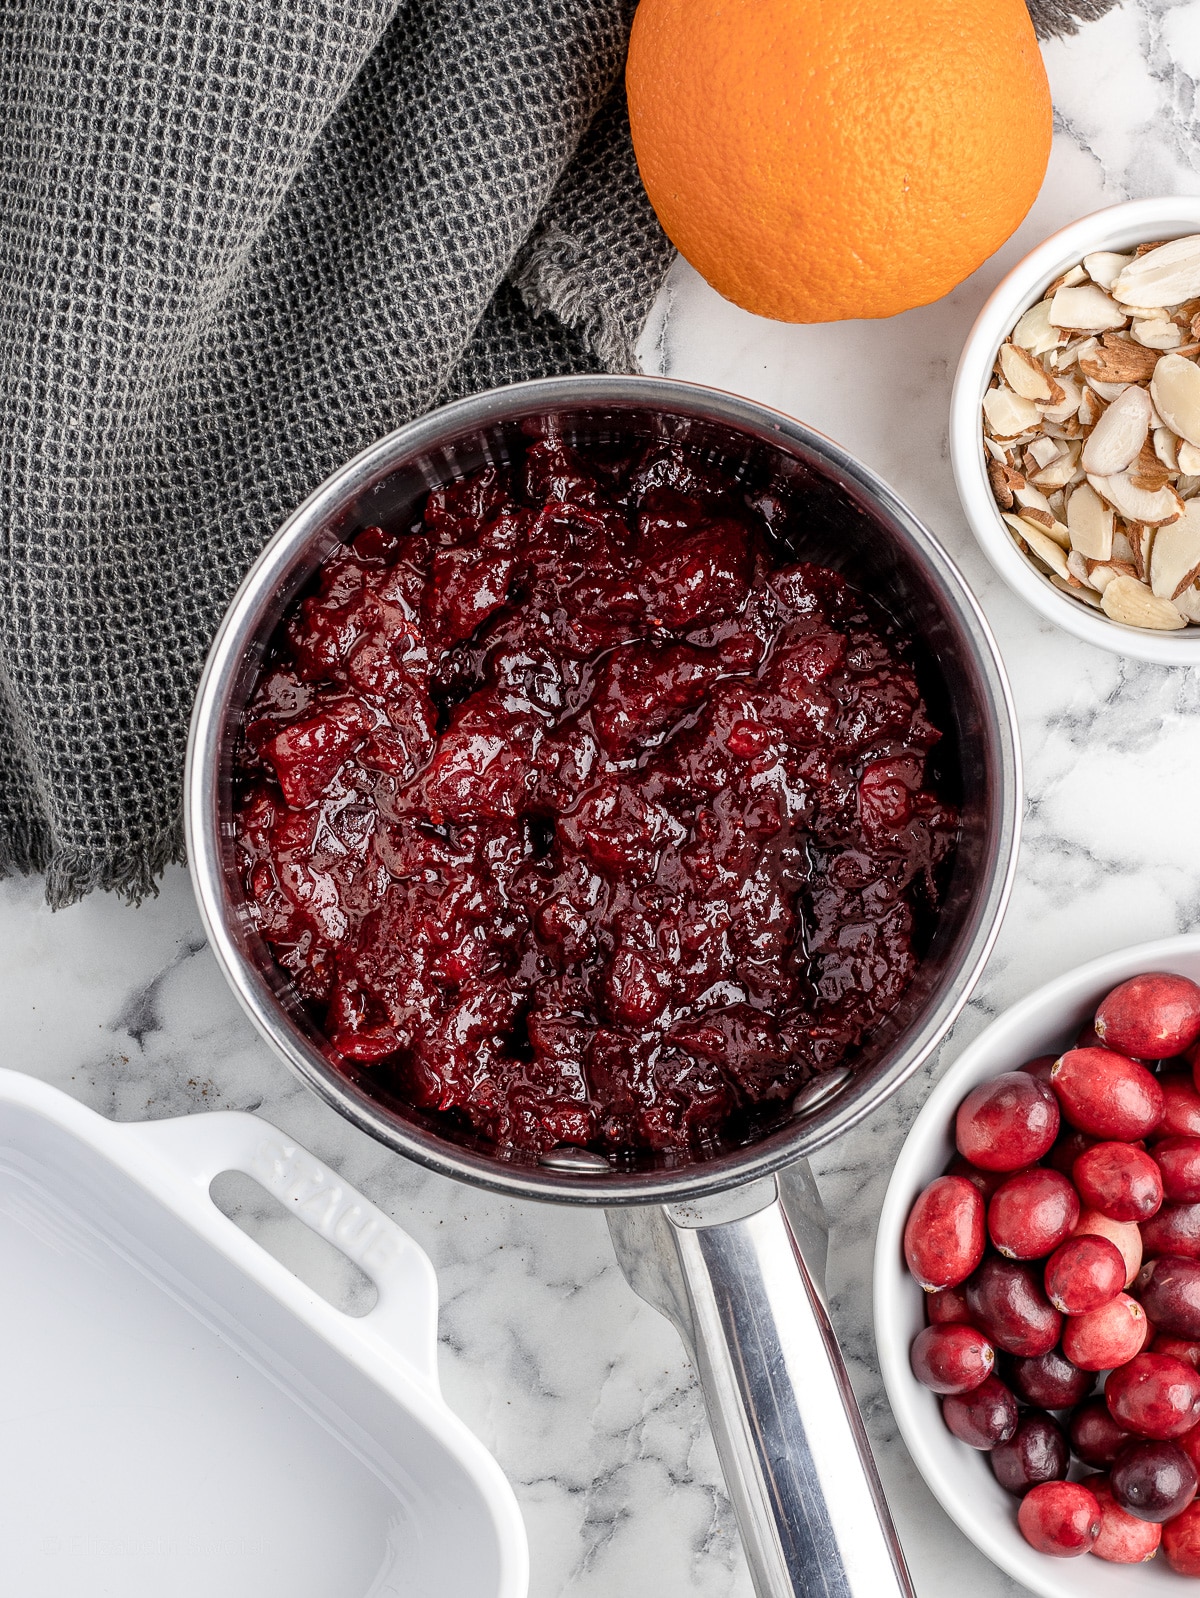 Cranberry Pie Filling in a saucepan surrounded by cranberries, an orange, and slivered almonds.